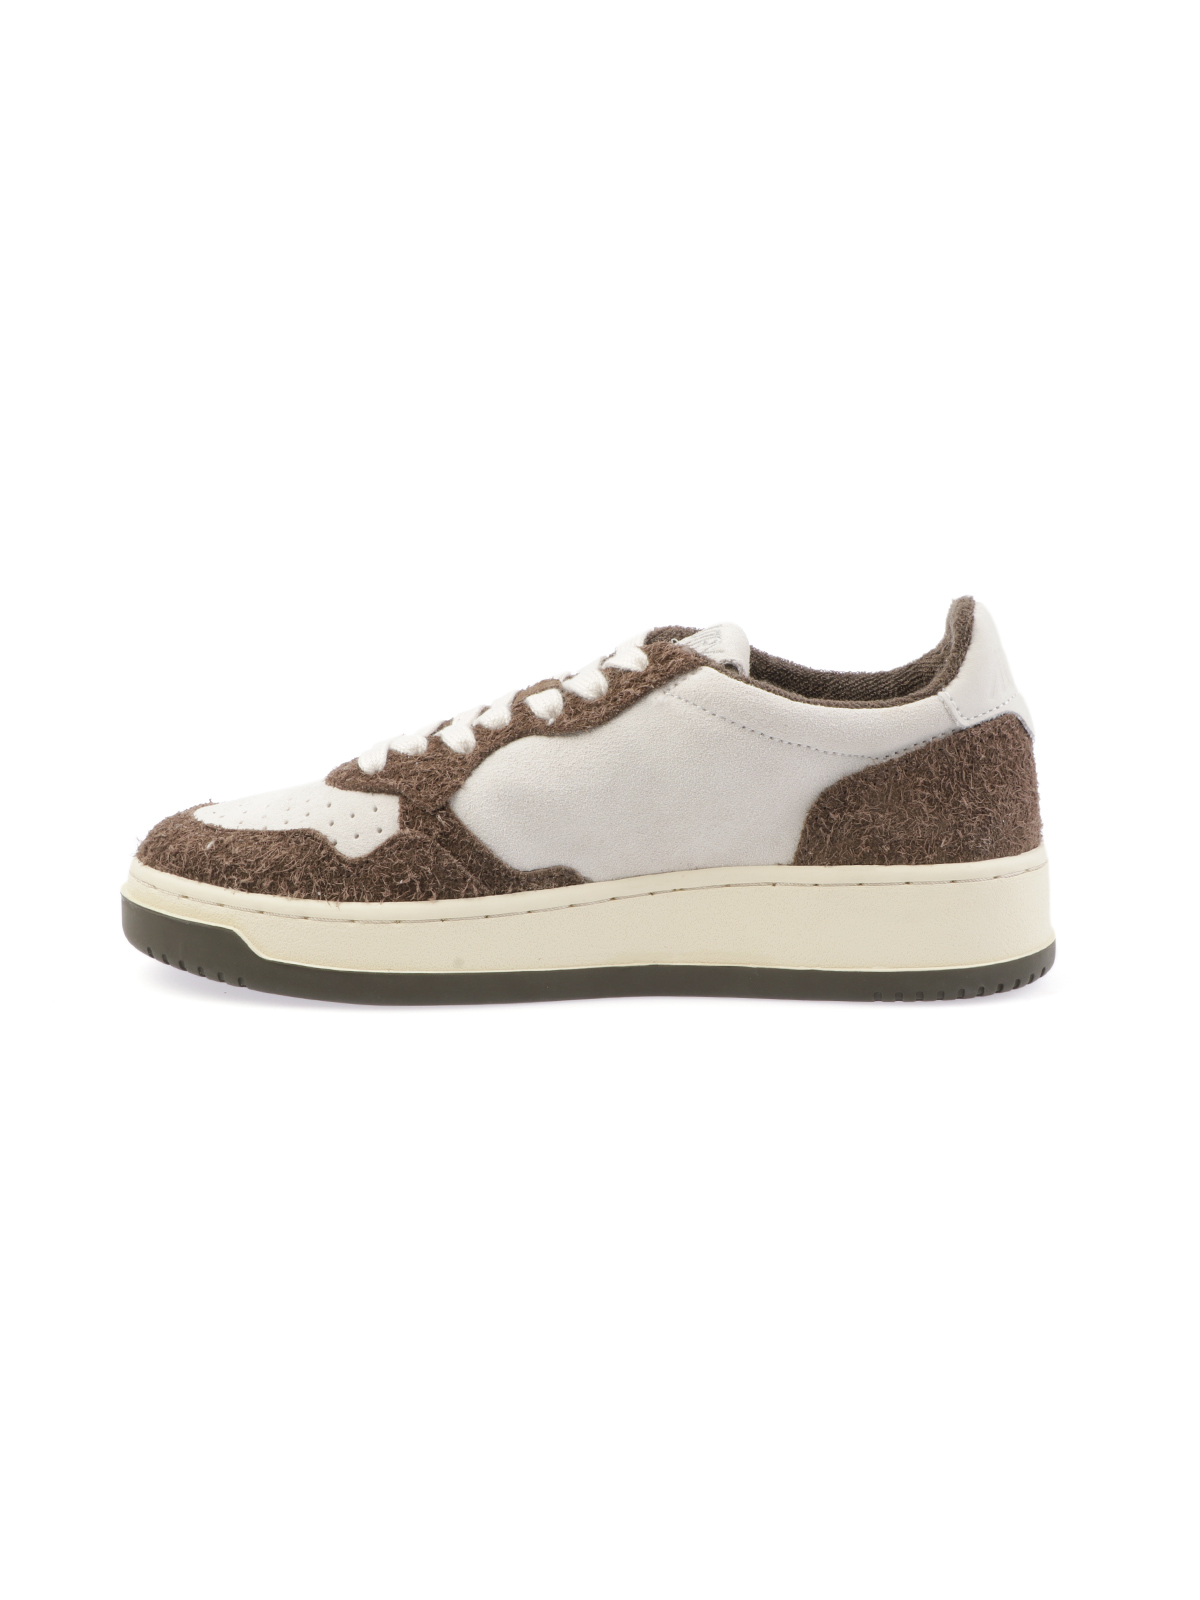 Immagine di AUTRY | Sneakers Donna Medalist Low in Hairy Suede Bicolore